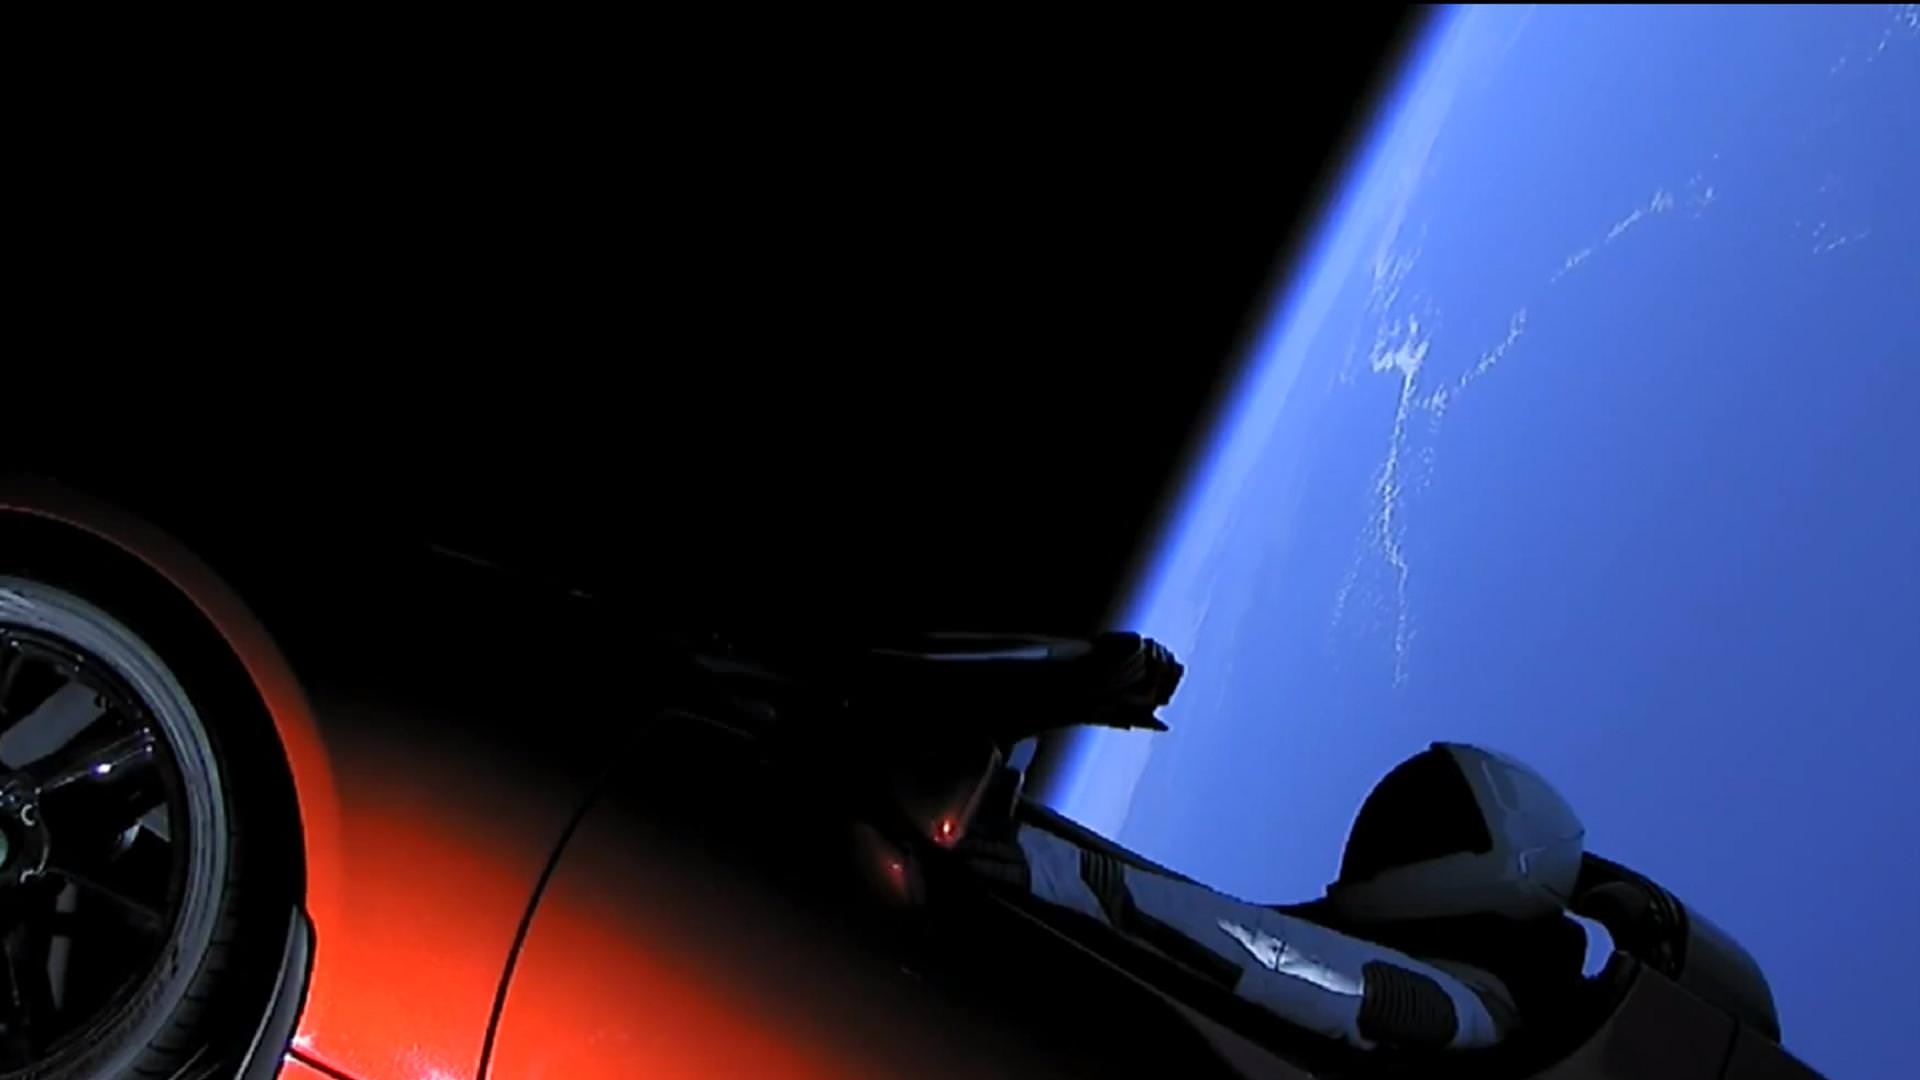 More starman. Can't be enough space cars